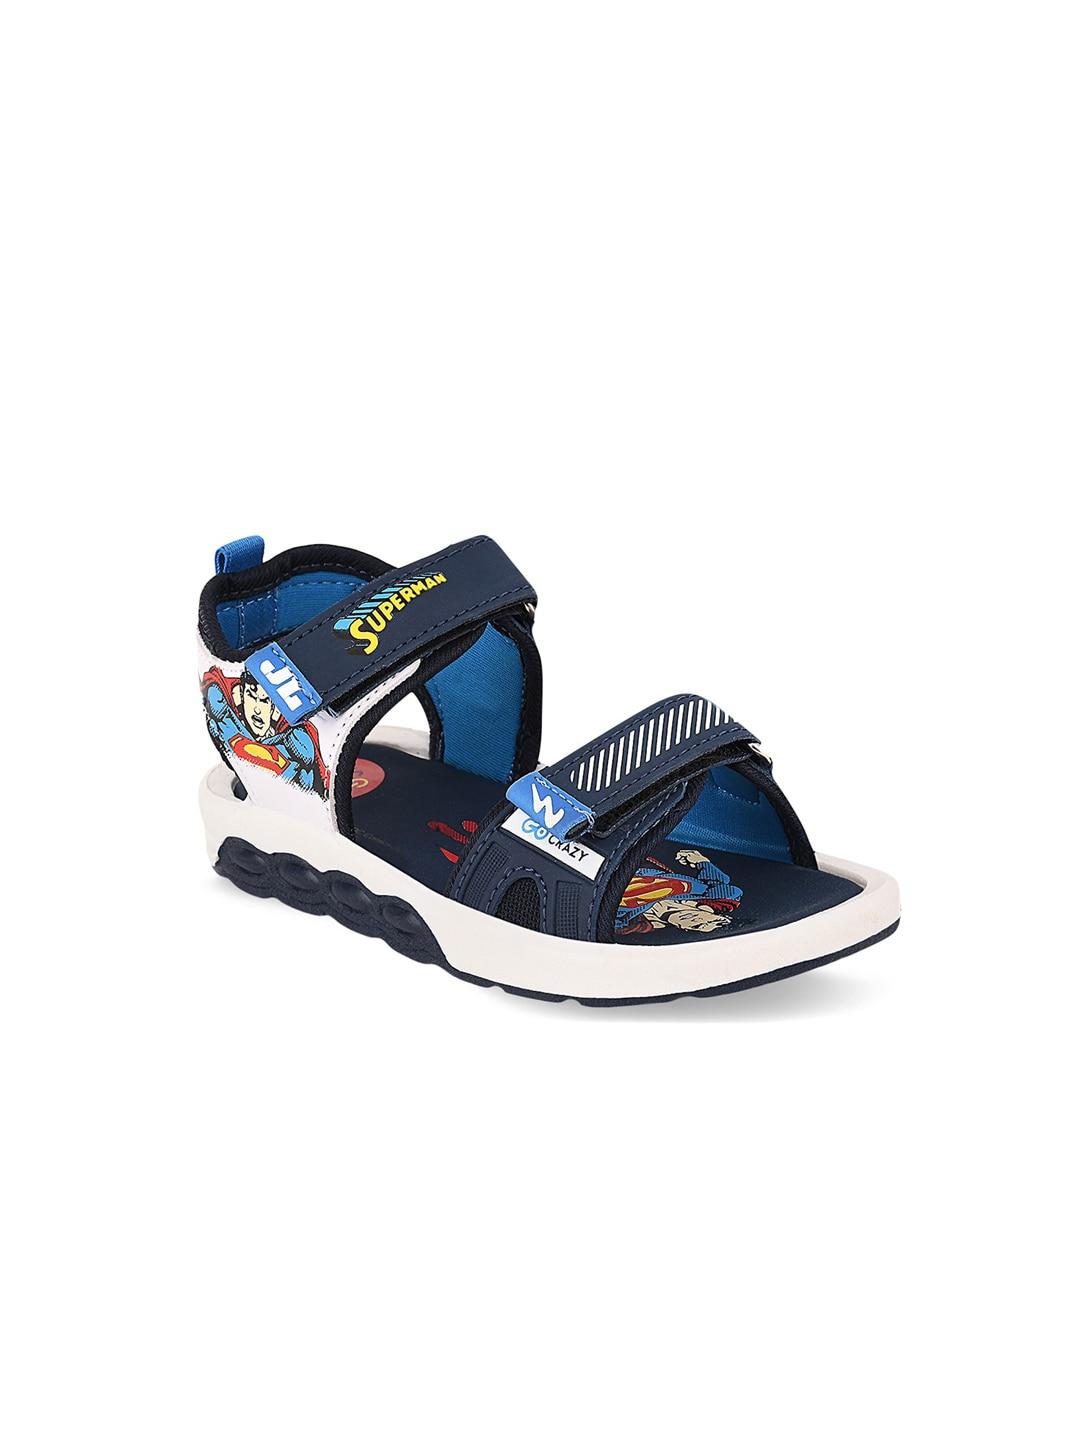 campus kids navy blue patterned sports sandals